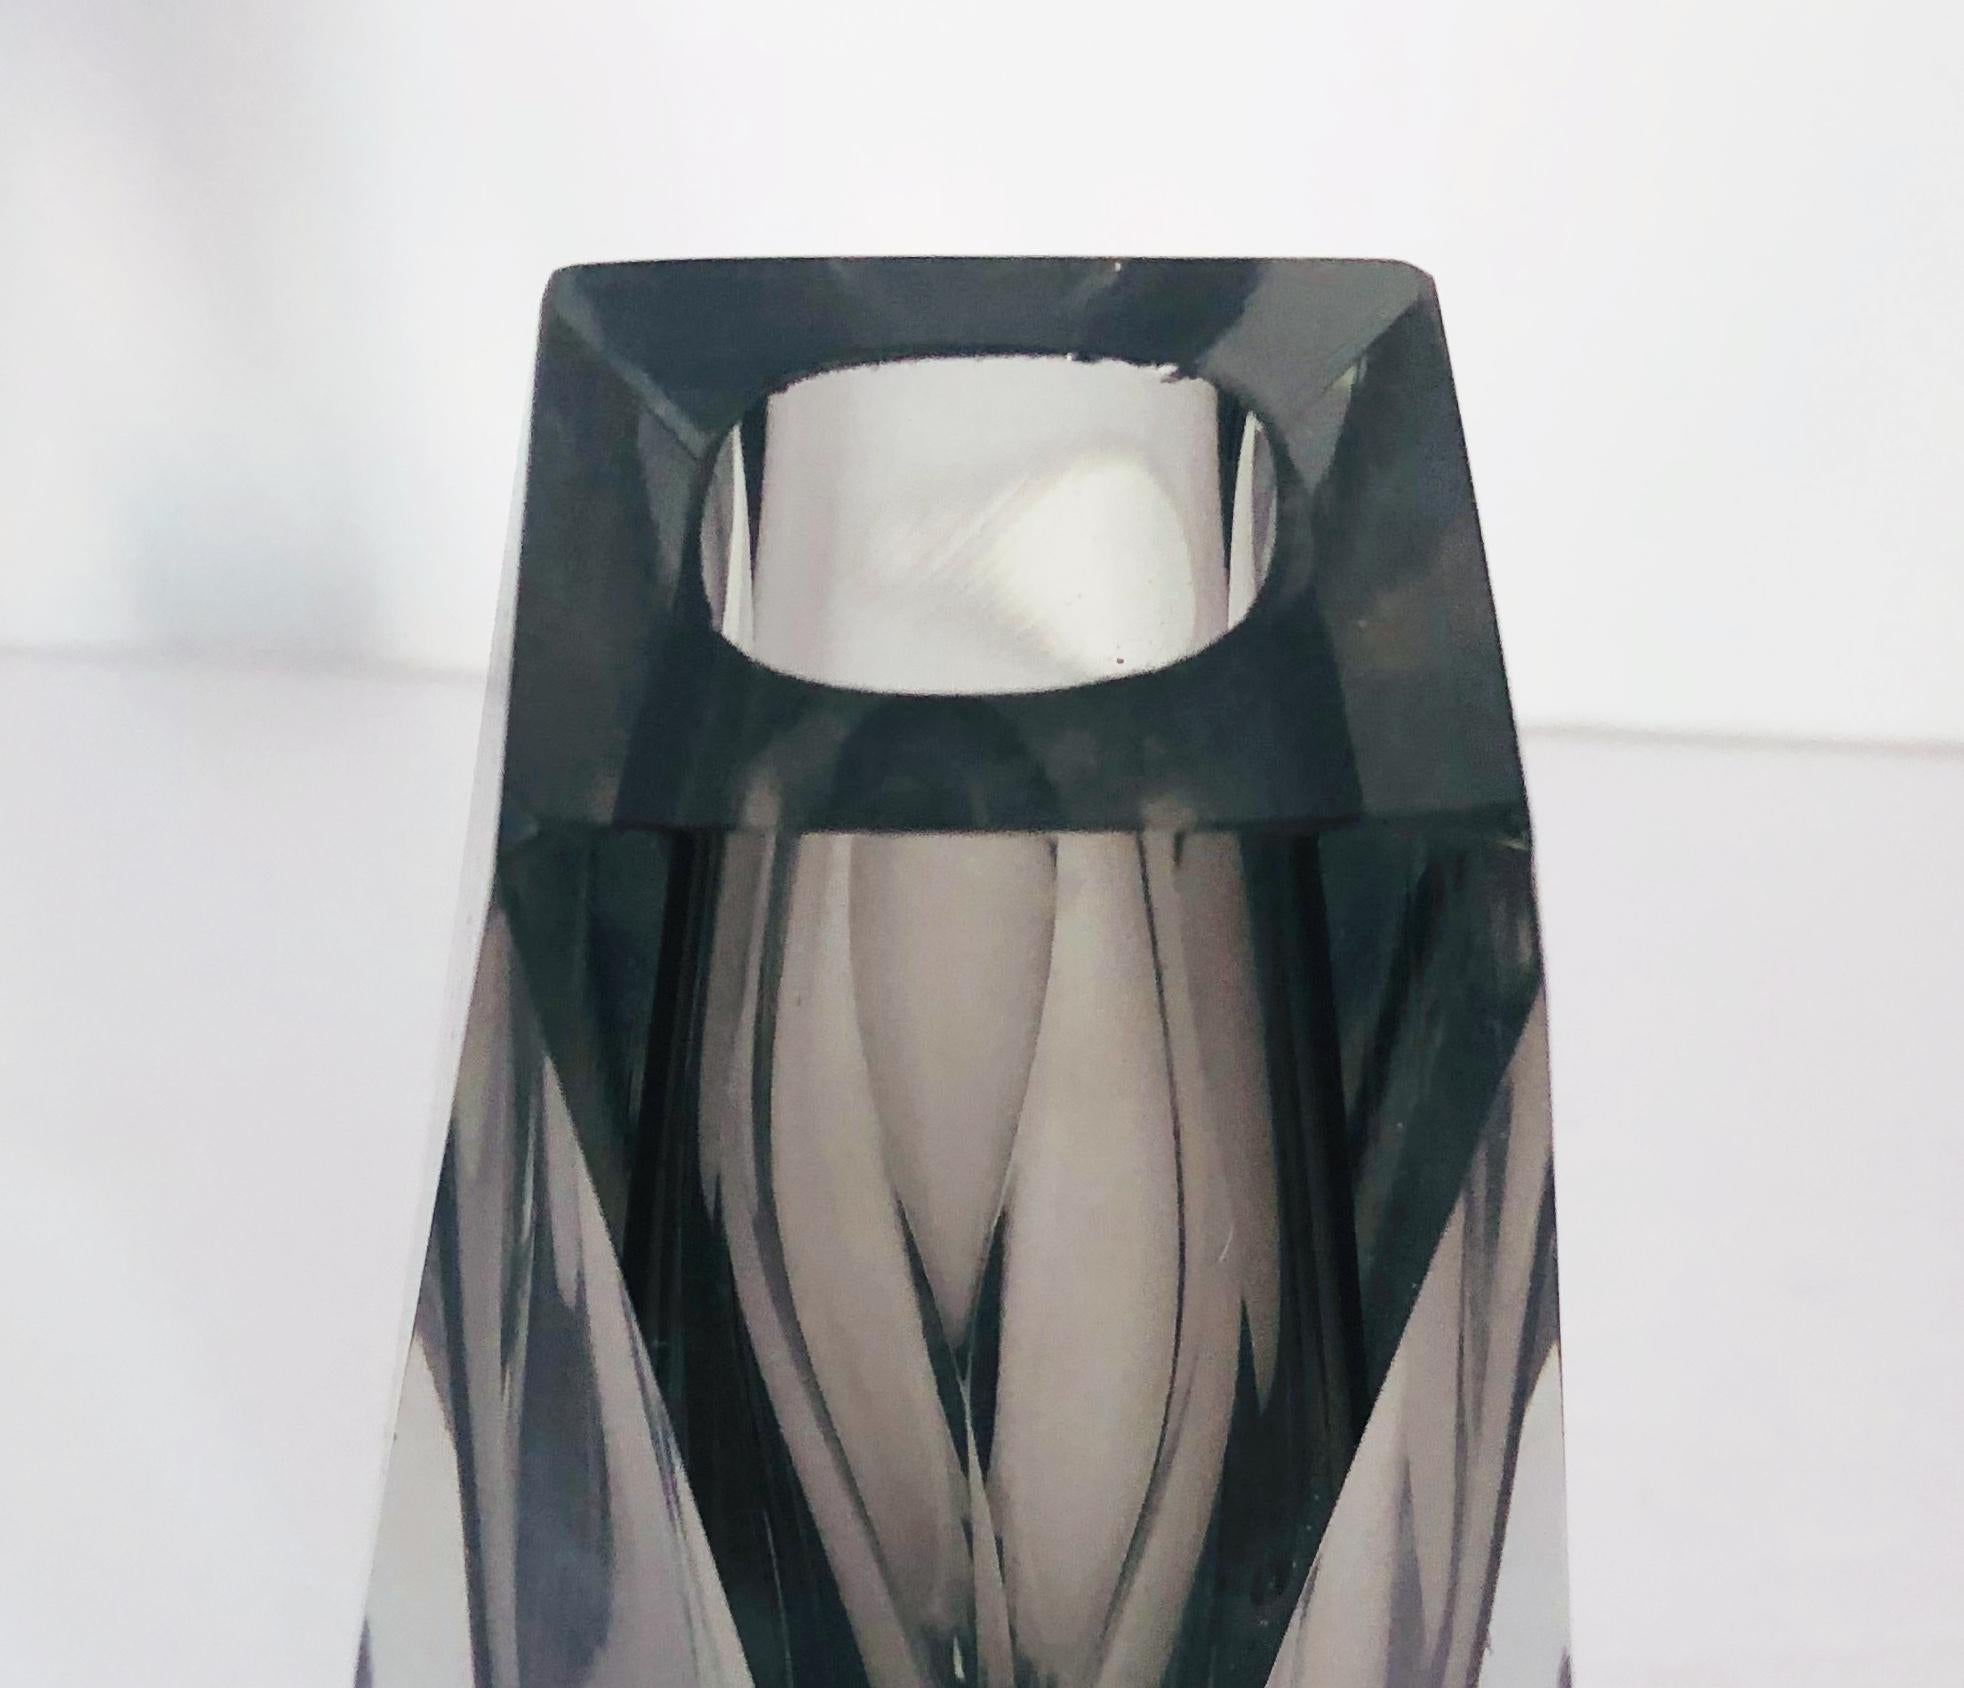 20th Century Smoky Faceted Sommerso Vase by Mandruzzato FINAL CLEARANCE SALE